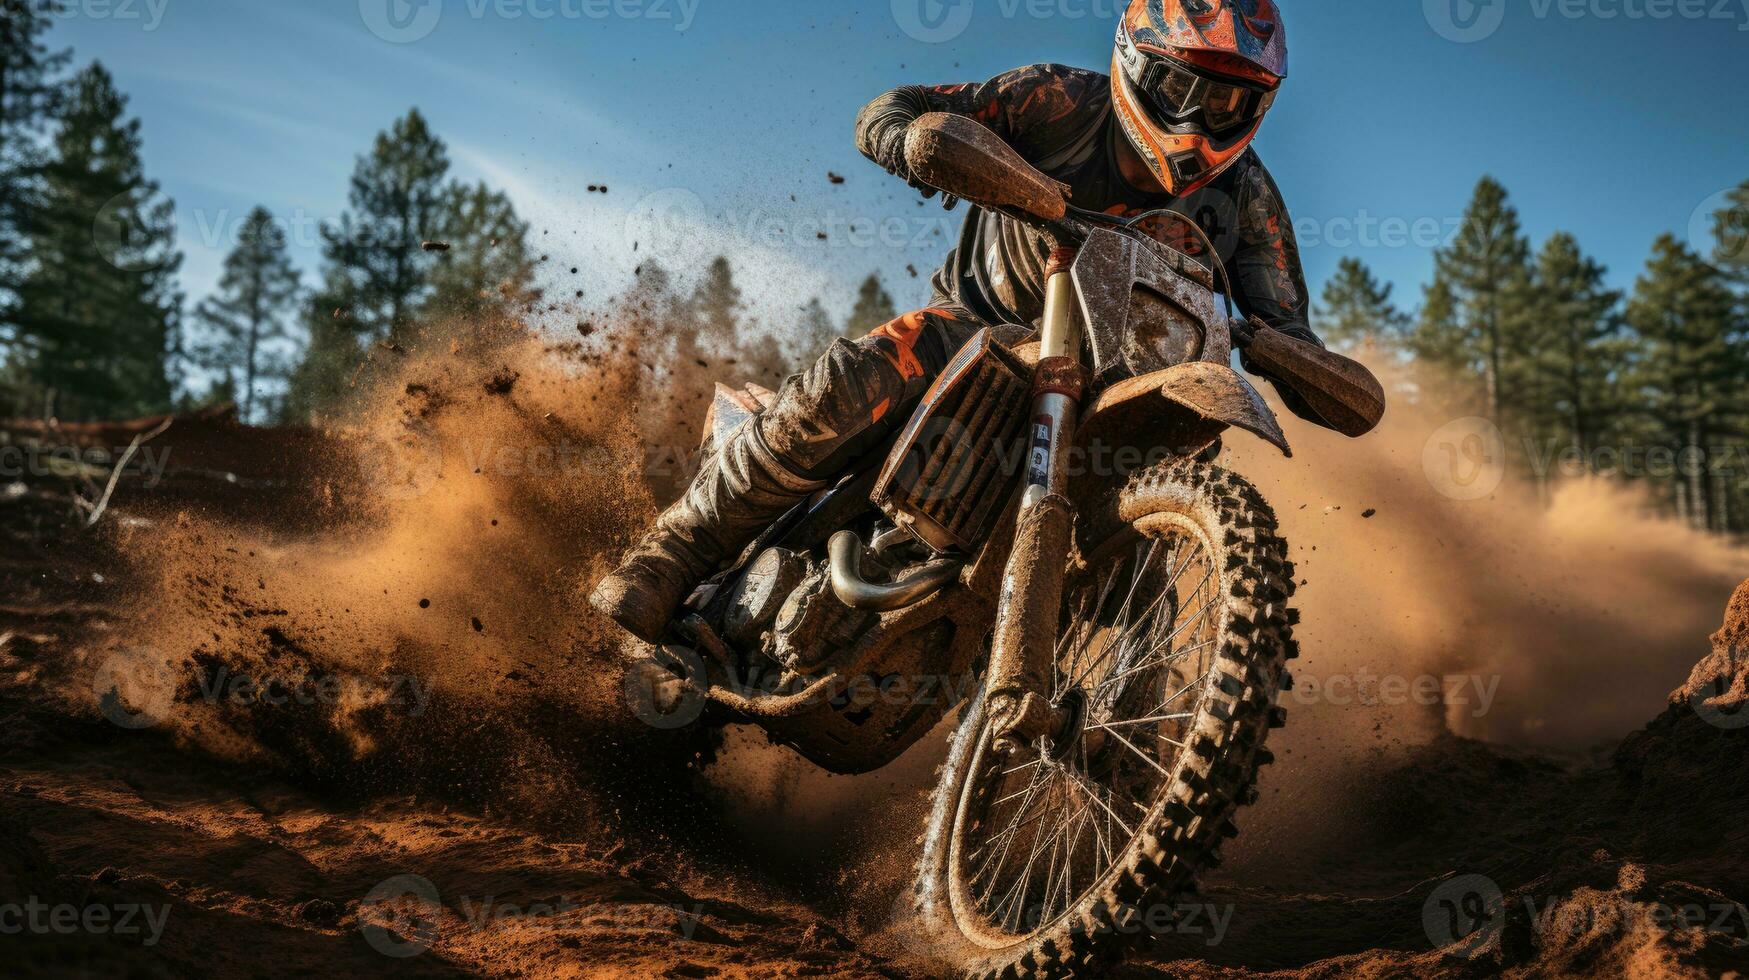 Motocross rider creates a lot of dust and dirt photo